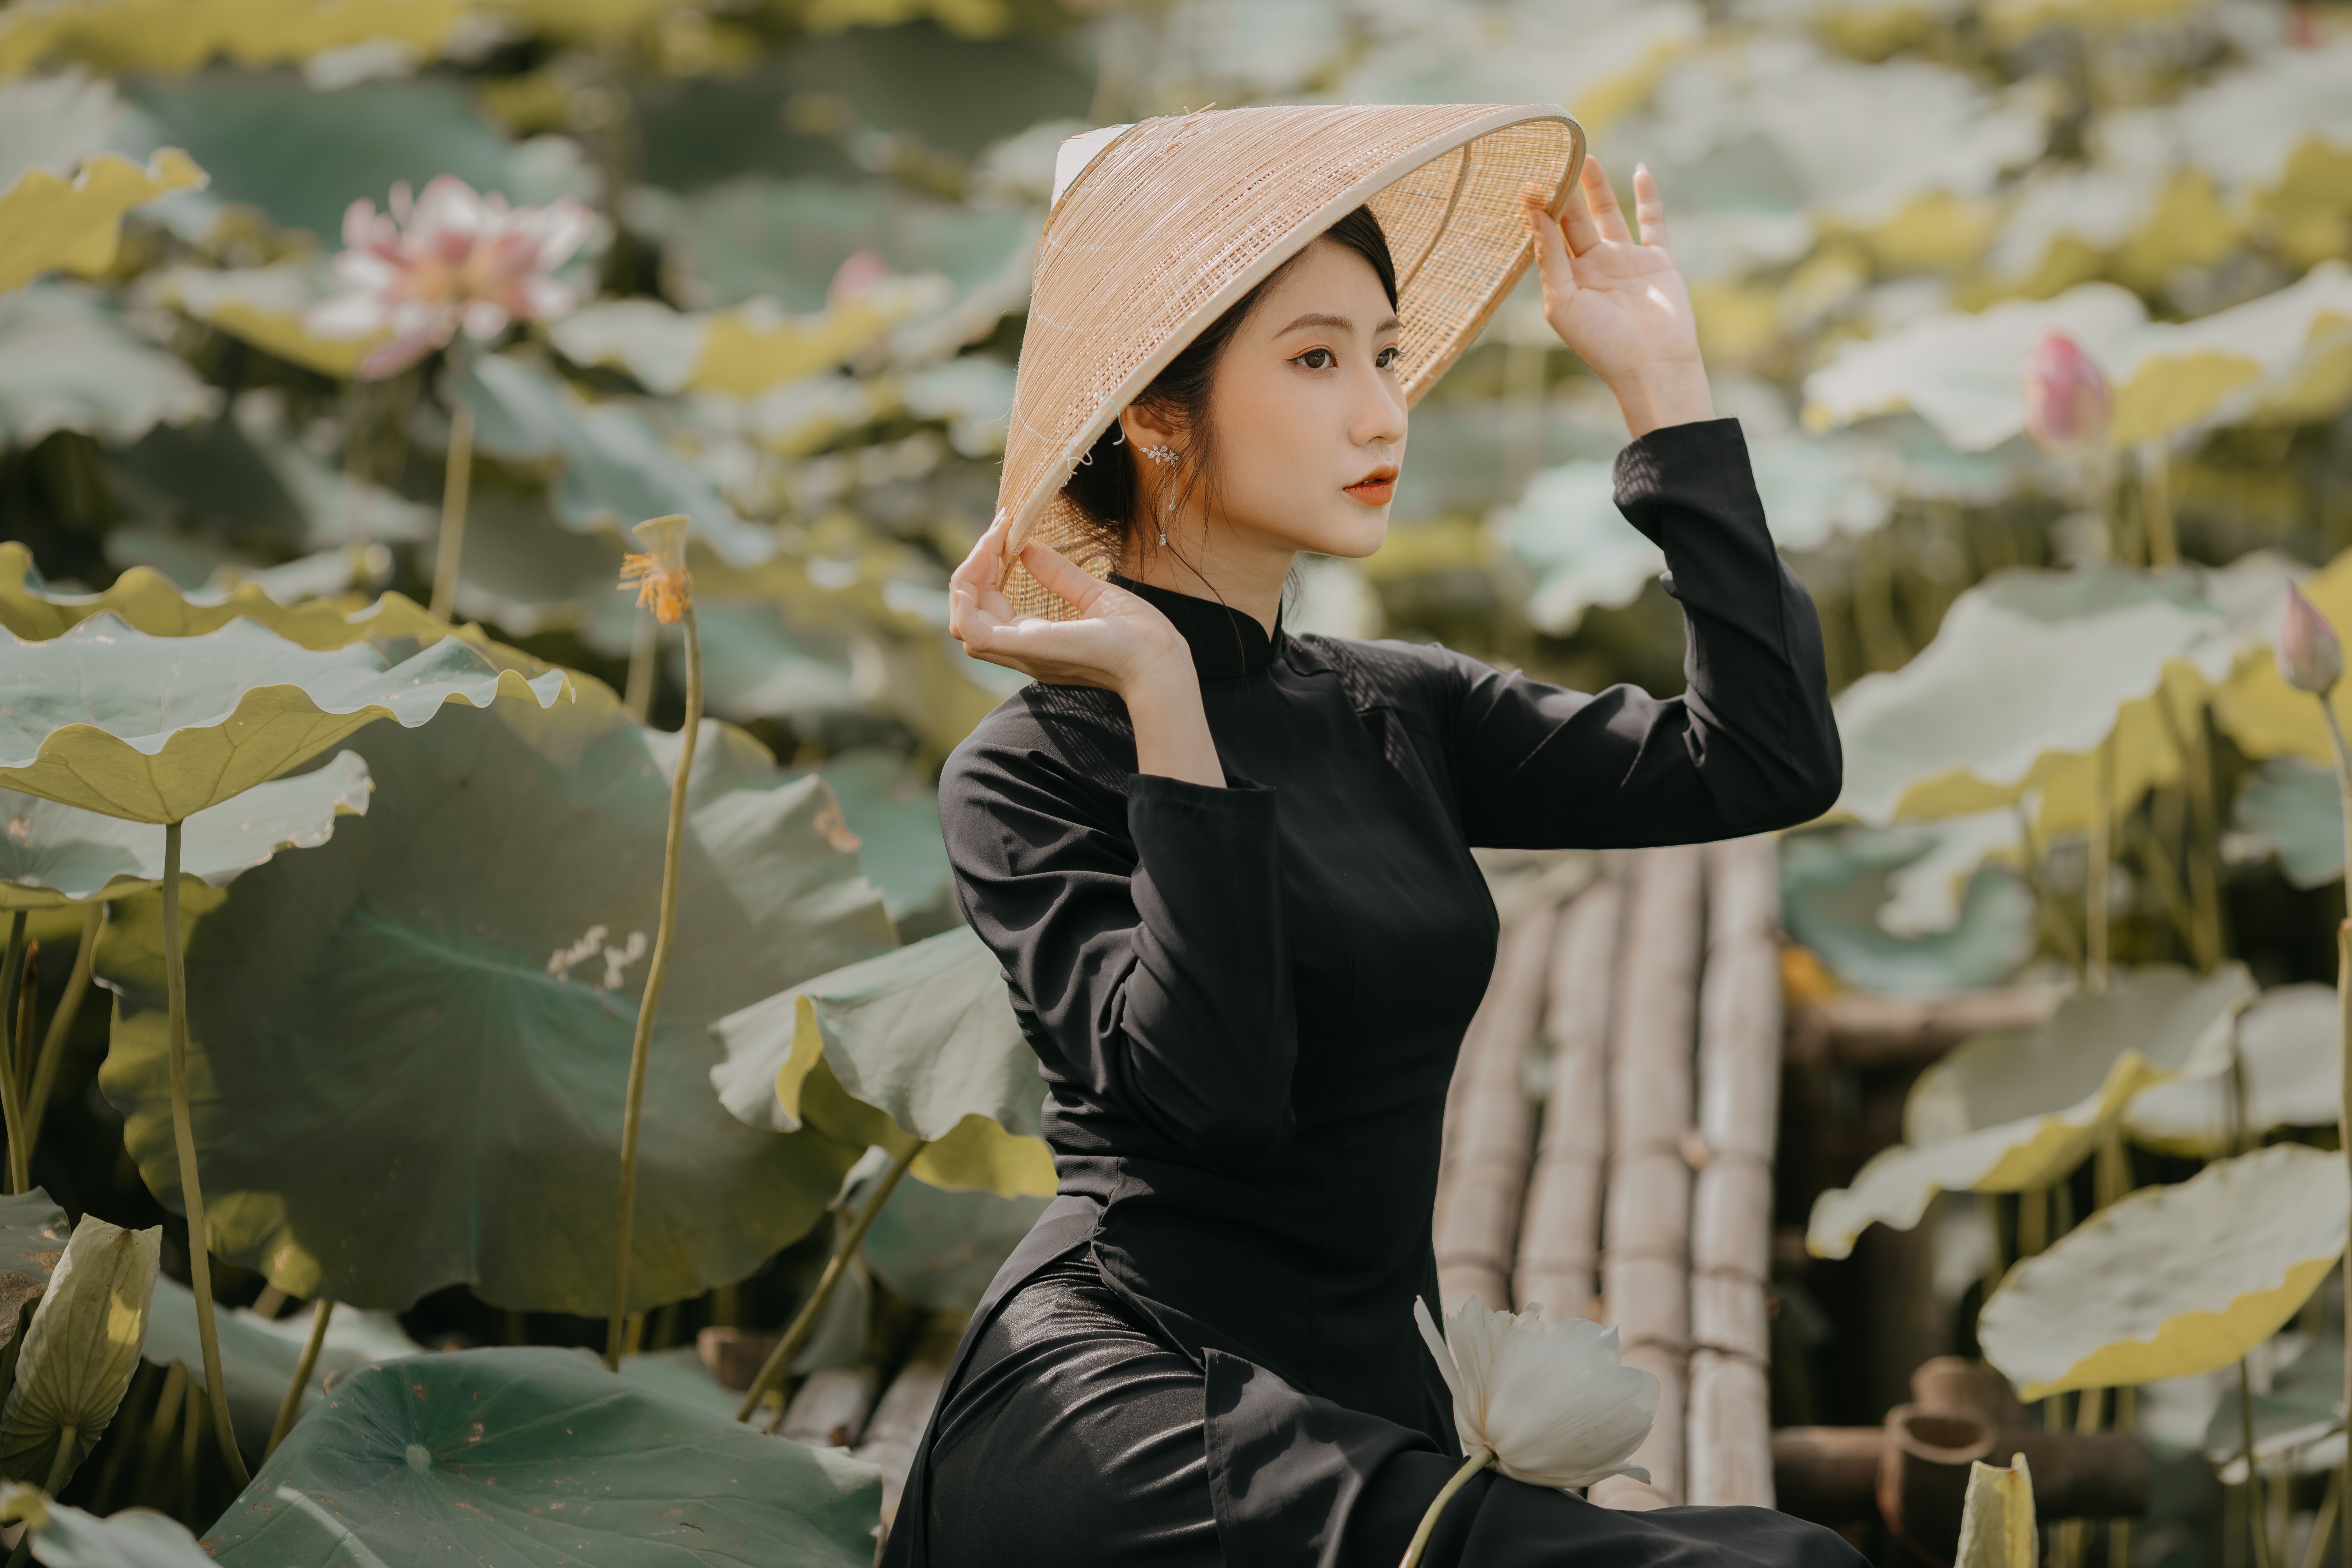 People 6720x4480 women Asian hat looking into the distance black clothing women outdoors plants áo dài